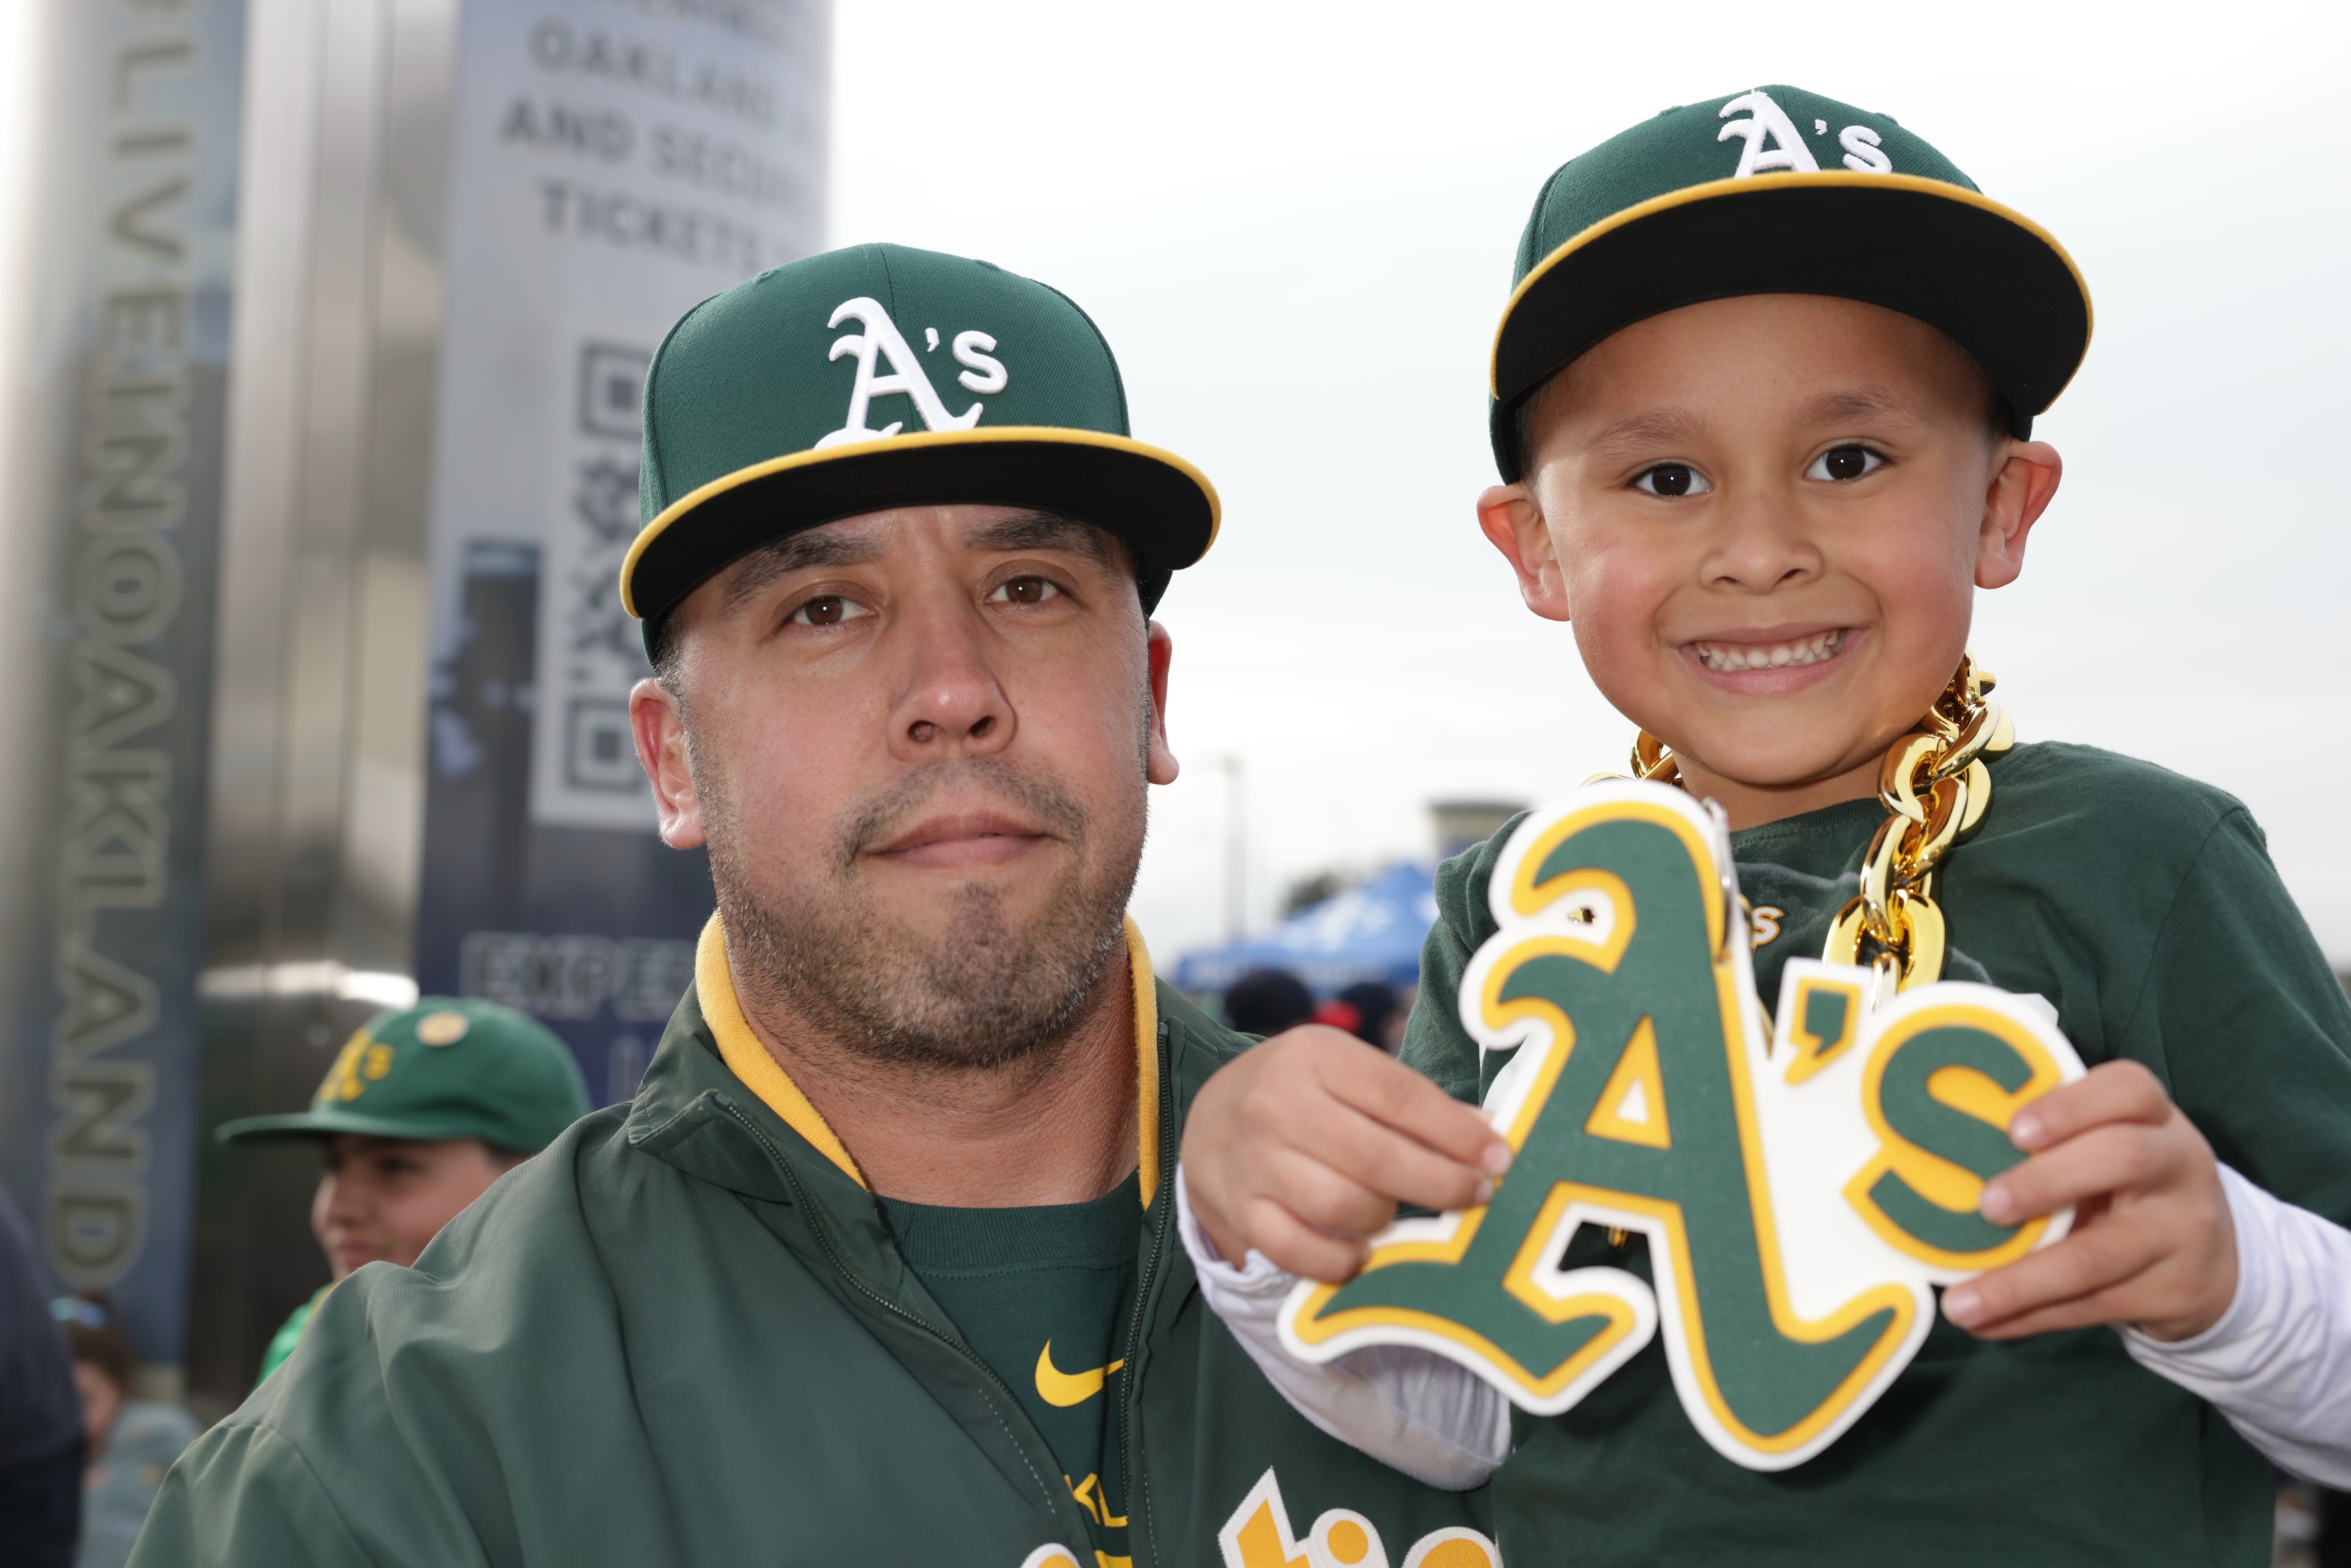 A man and a smiling boy in Oakland A's gear with foam fingers.